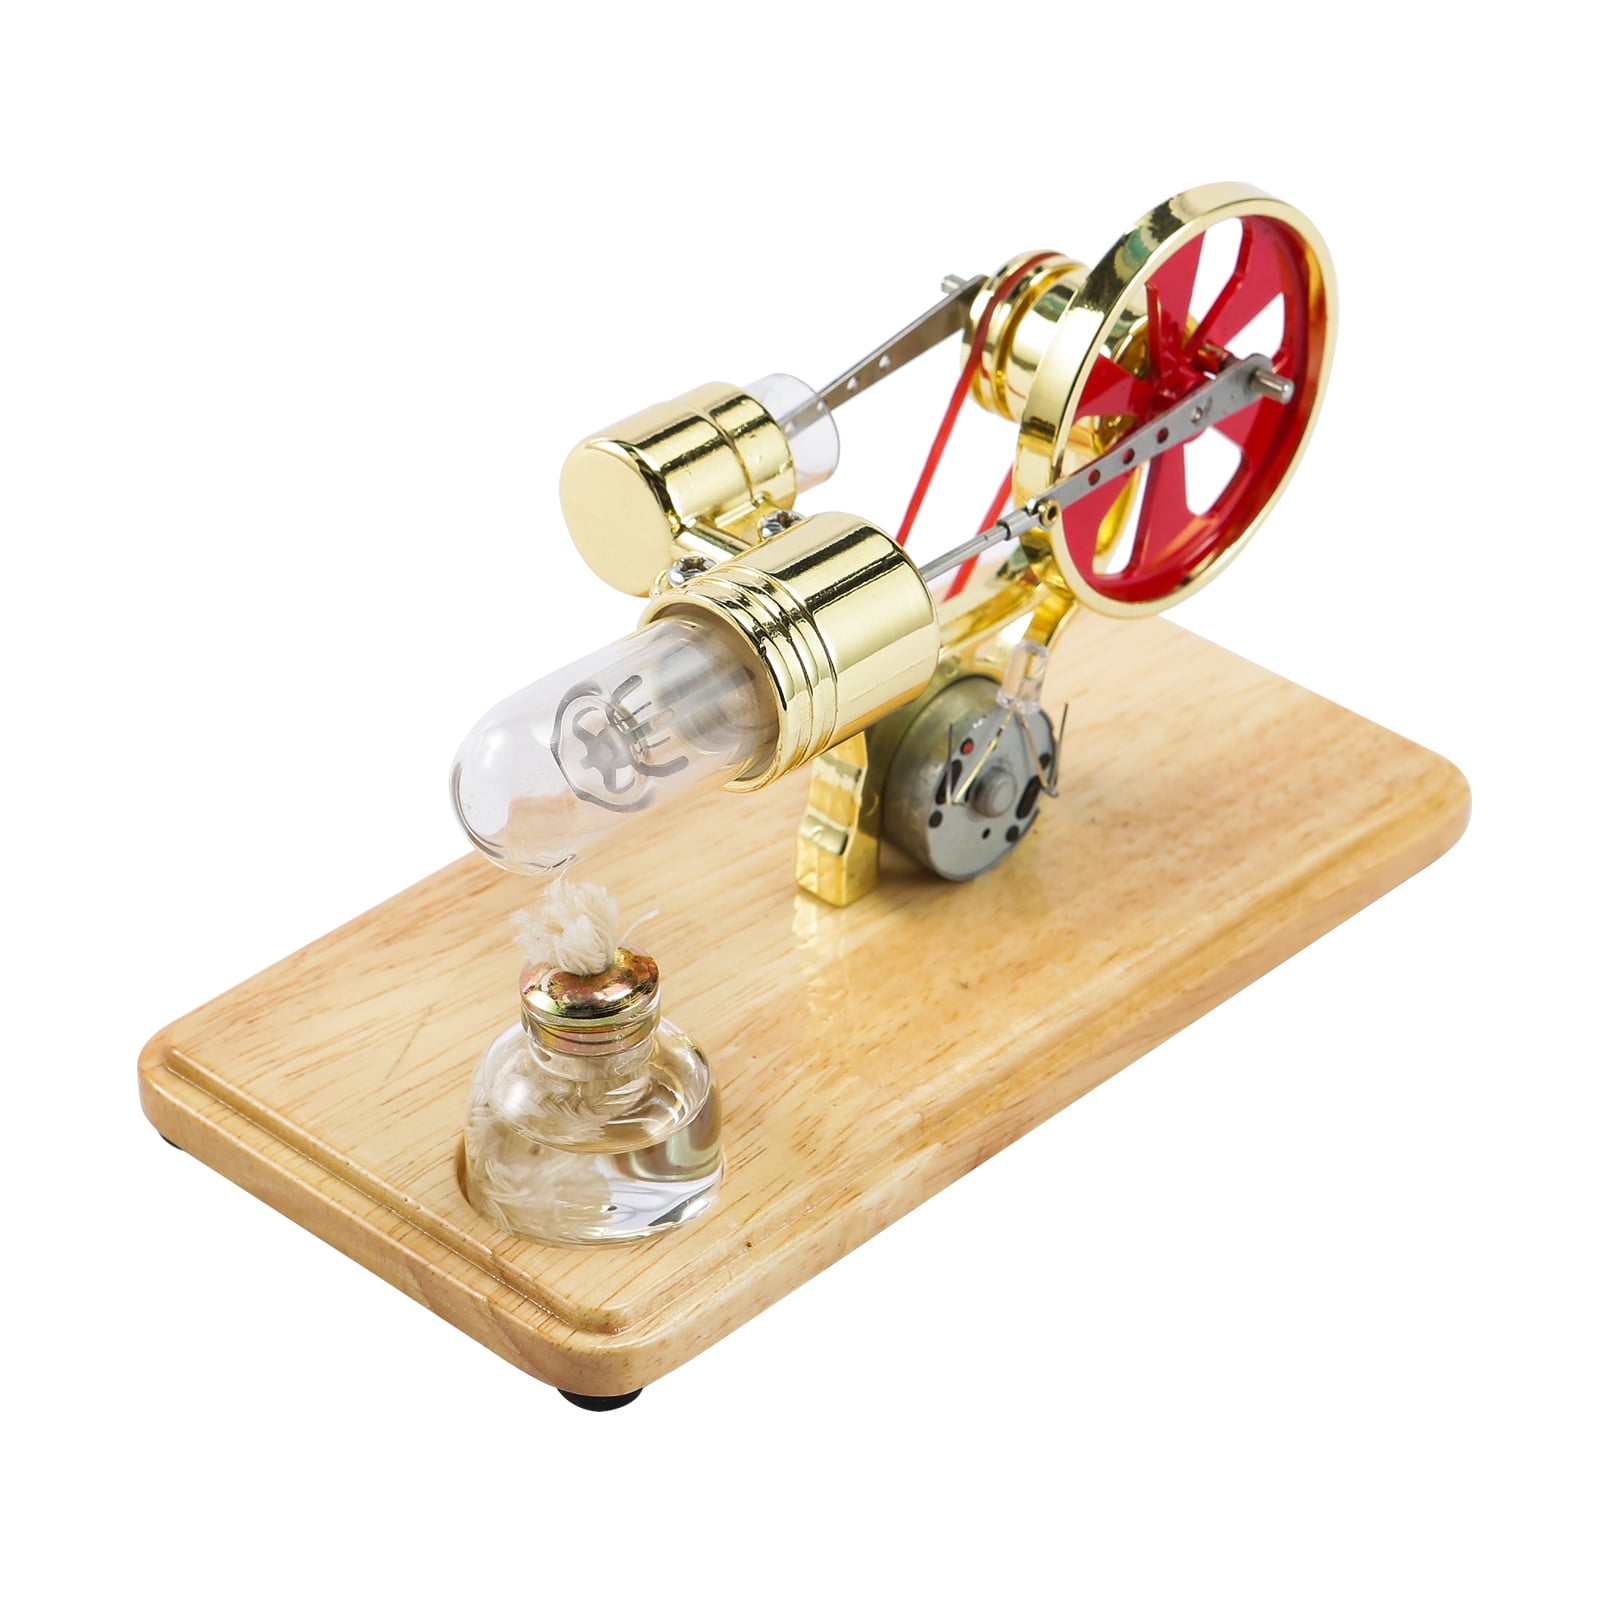 New Hot Air Stirling Engine Model Generator Motor Steam Power Toy with Ligh Kit 